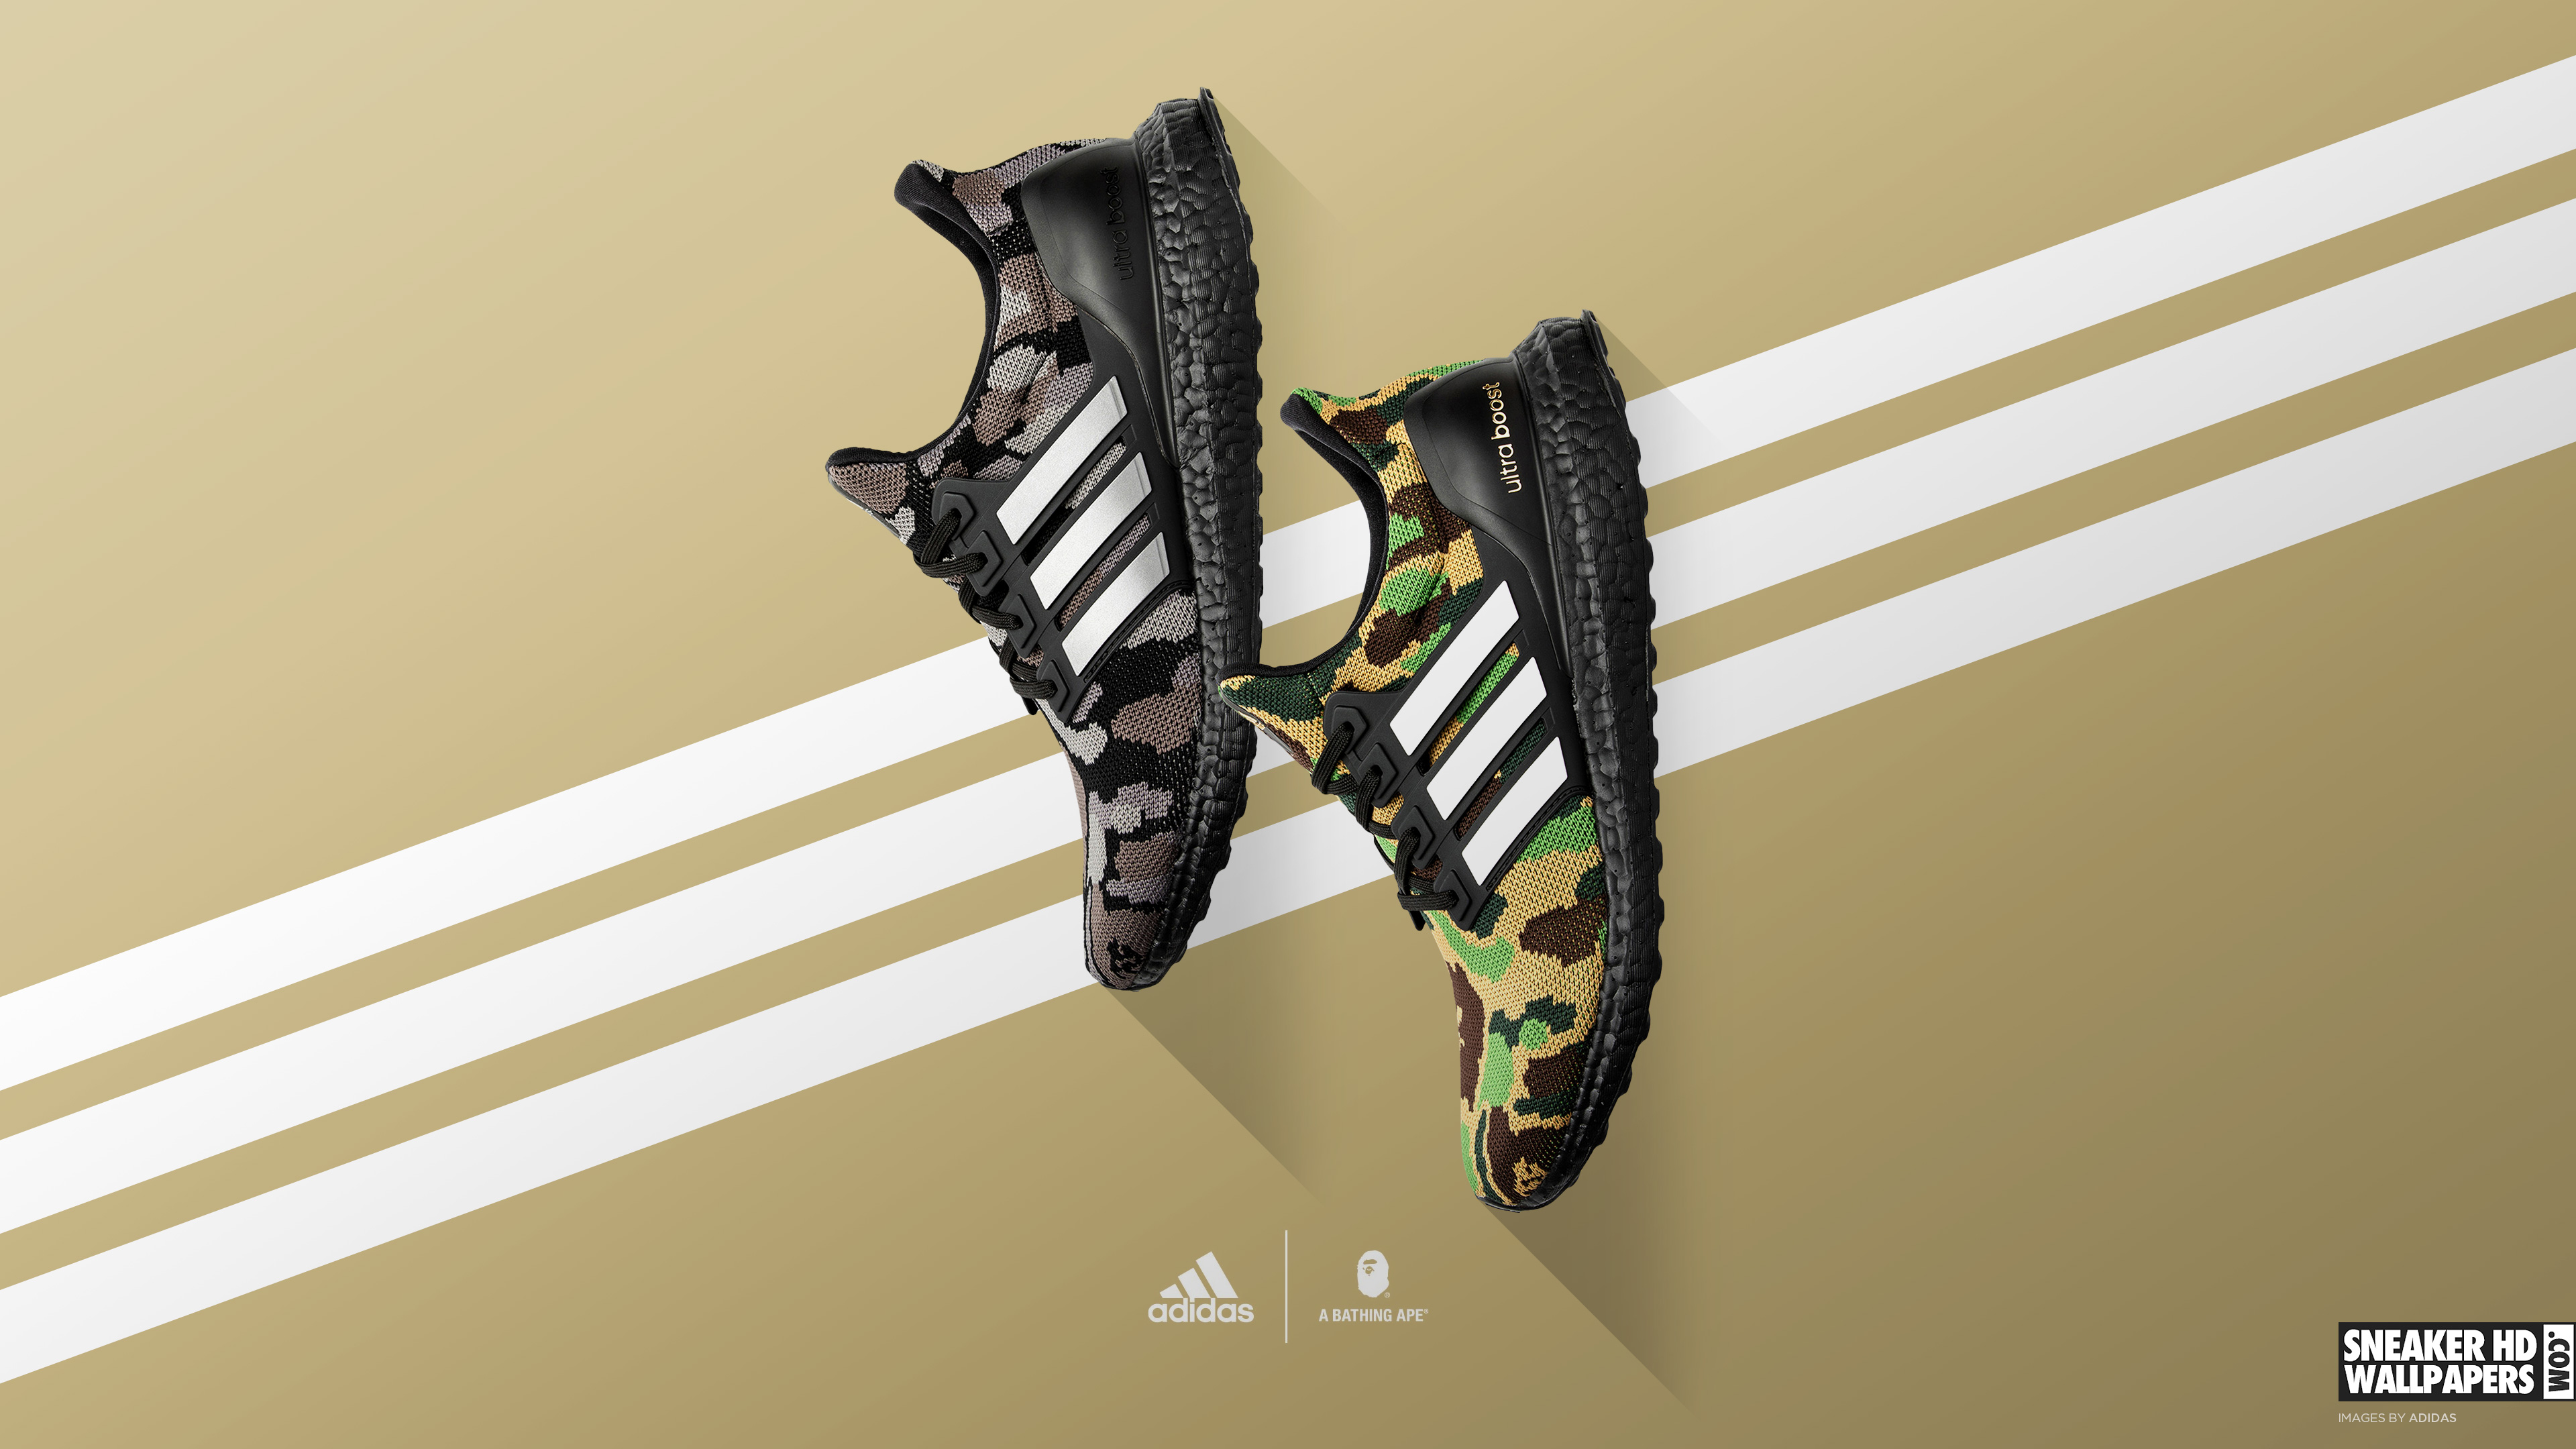 Â your favorite sneakers in k retina mobile and hd wallpaper resolutions adidas ultra boost archives